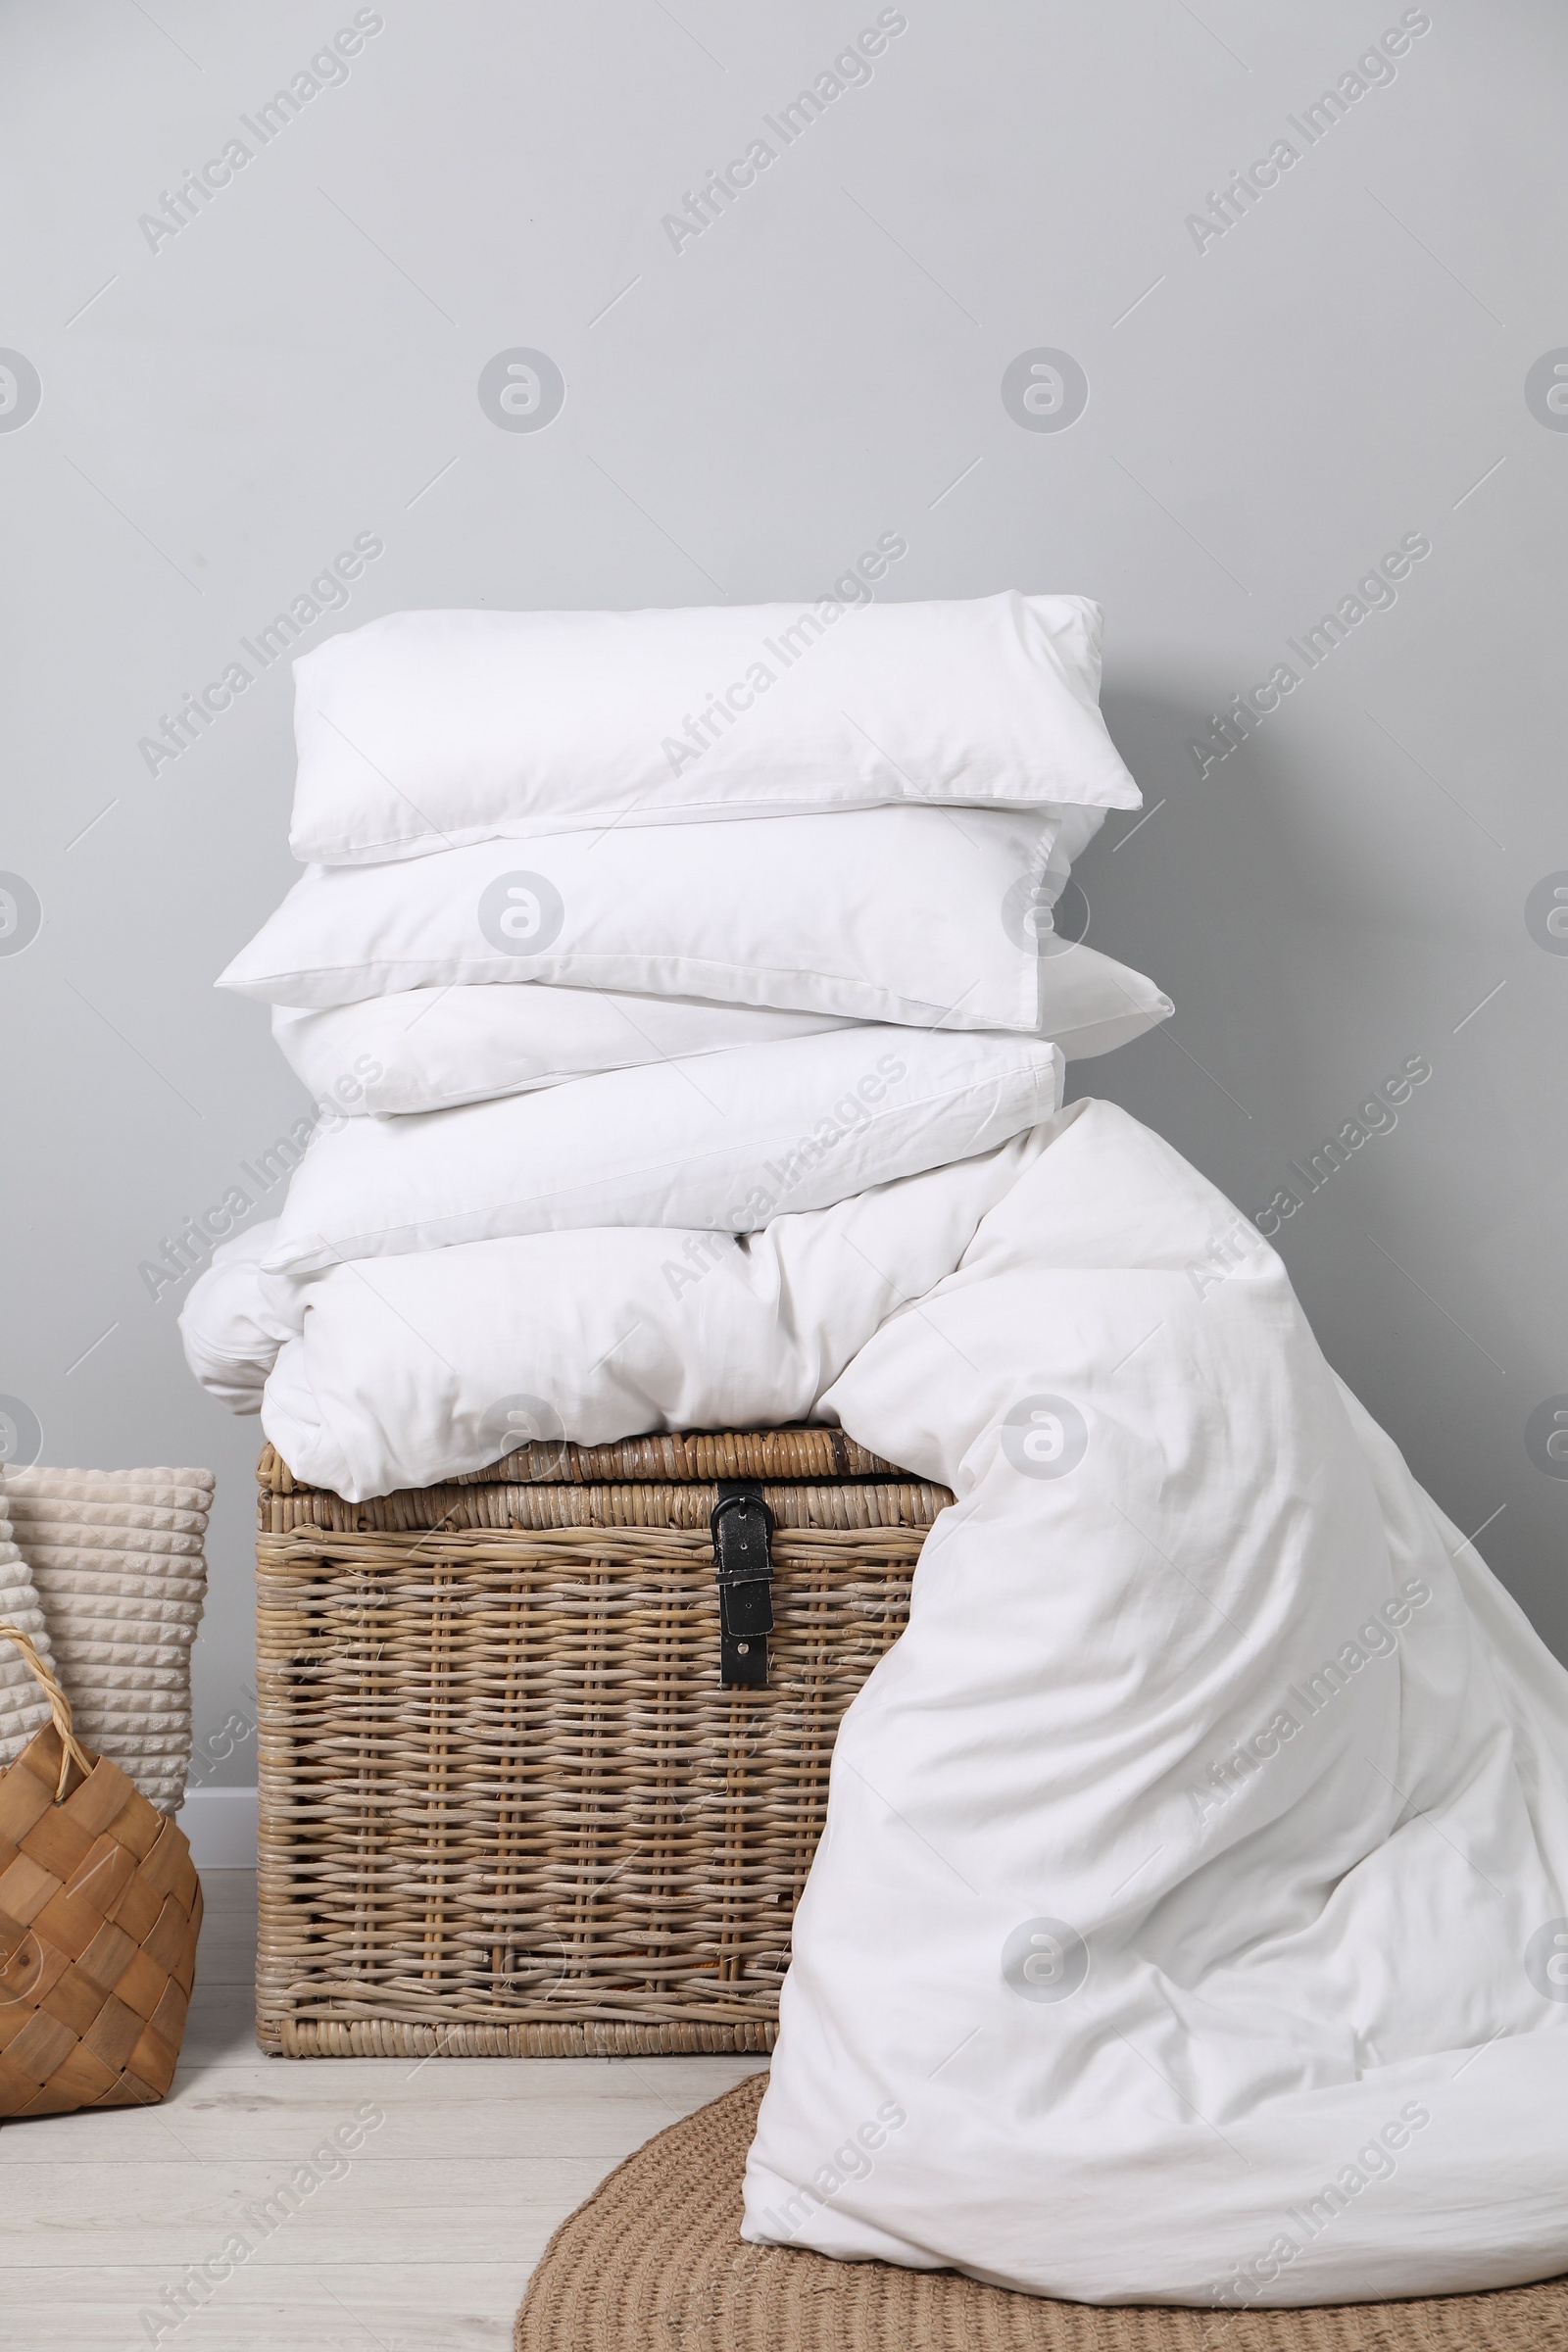 Photo of Soft pillows, duvet, bag and wicker trunk indoors